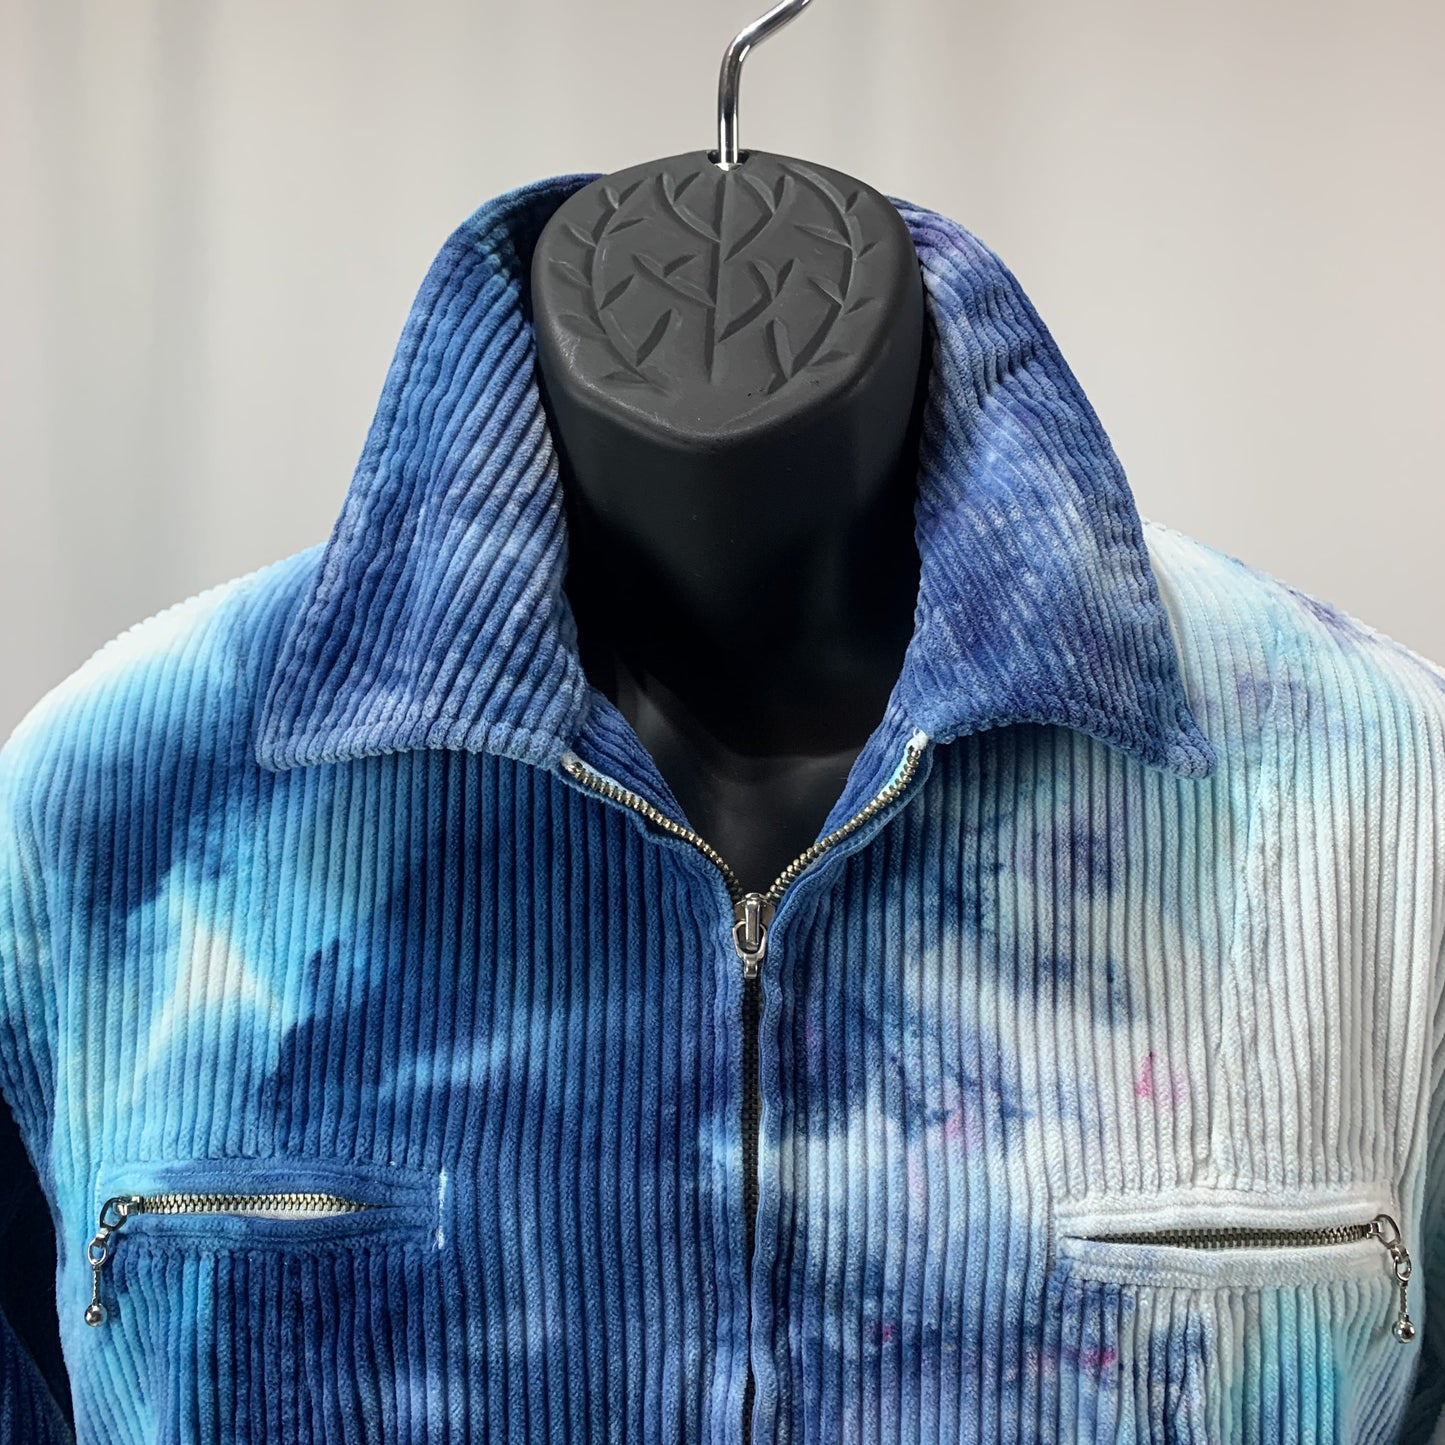 Deep Space Blues | Quilted Corduroy Jacket | 42” chest